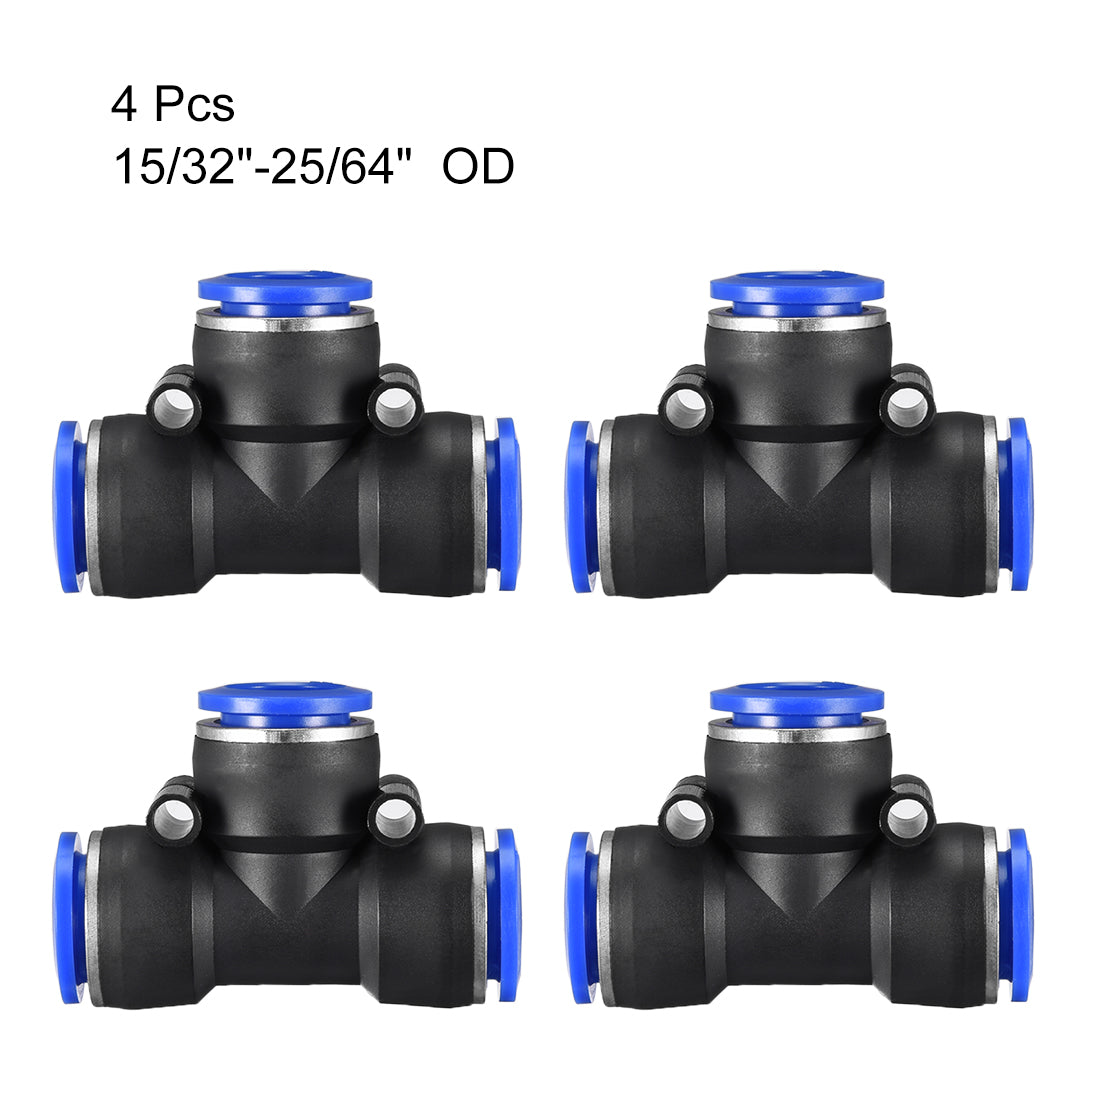 uxcell Uxcell 4 pcs Push To Connect Fittings T Type Tube Connect 15/32“ -25/64” od Push Fit Fittings Tube Fittings Push Lock Blue (12-10mm T tee)